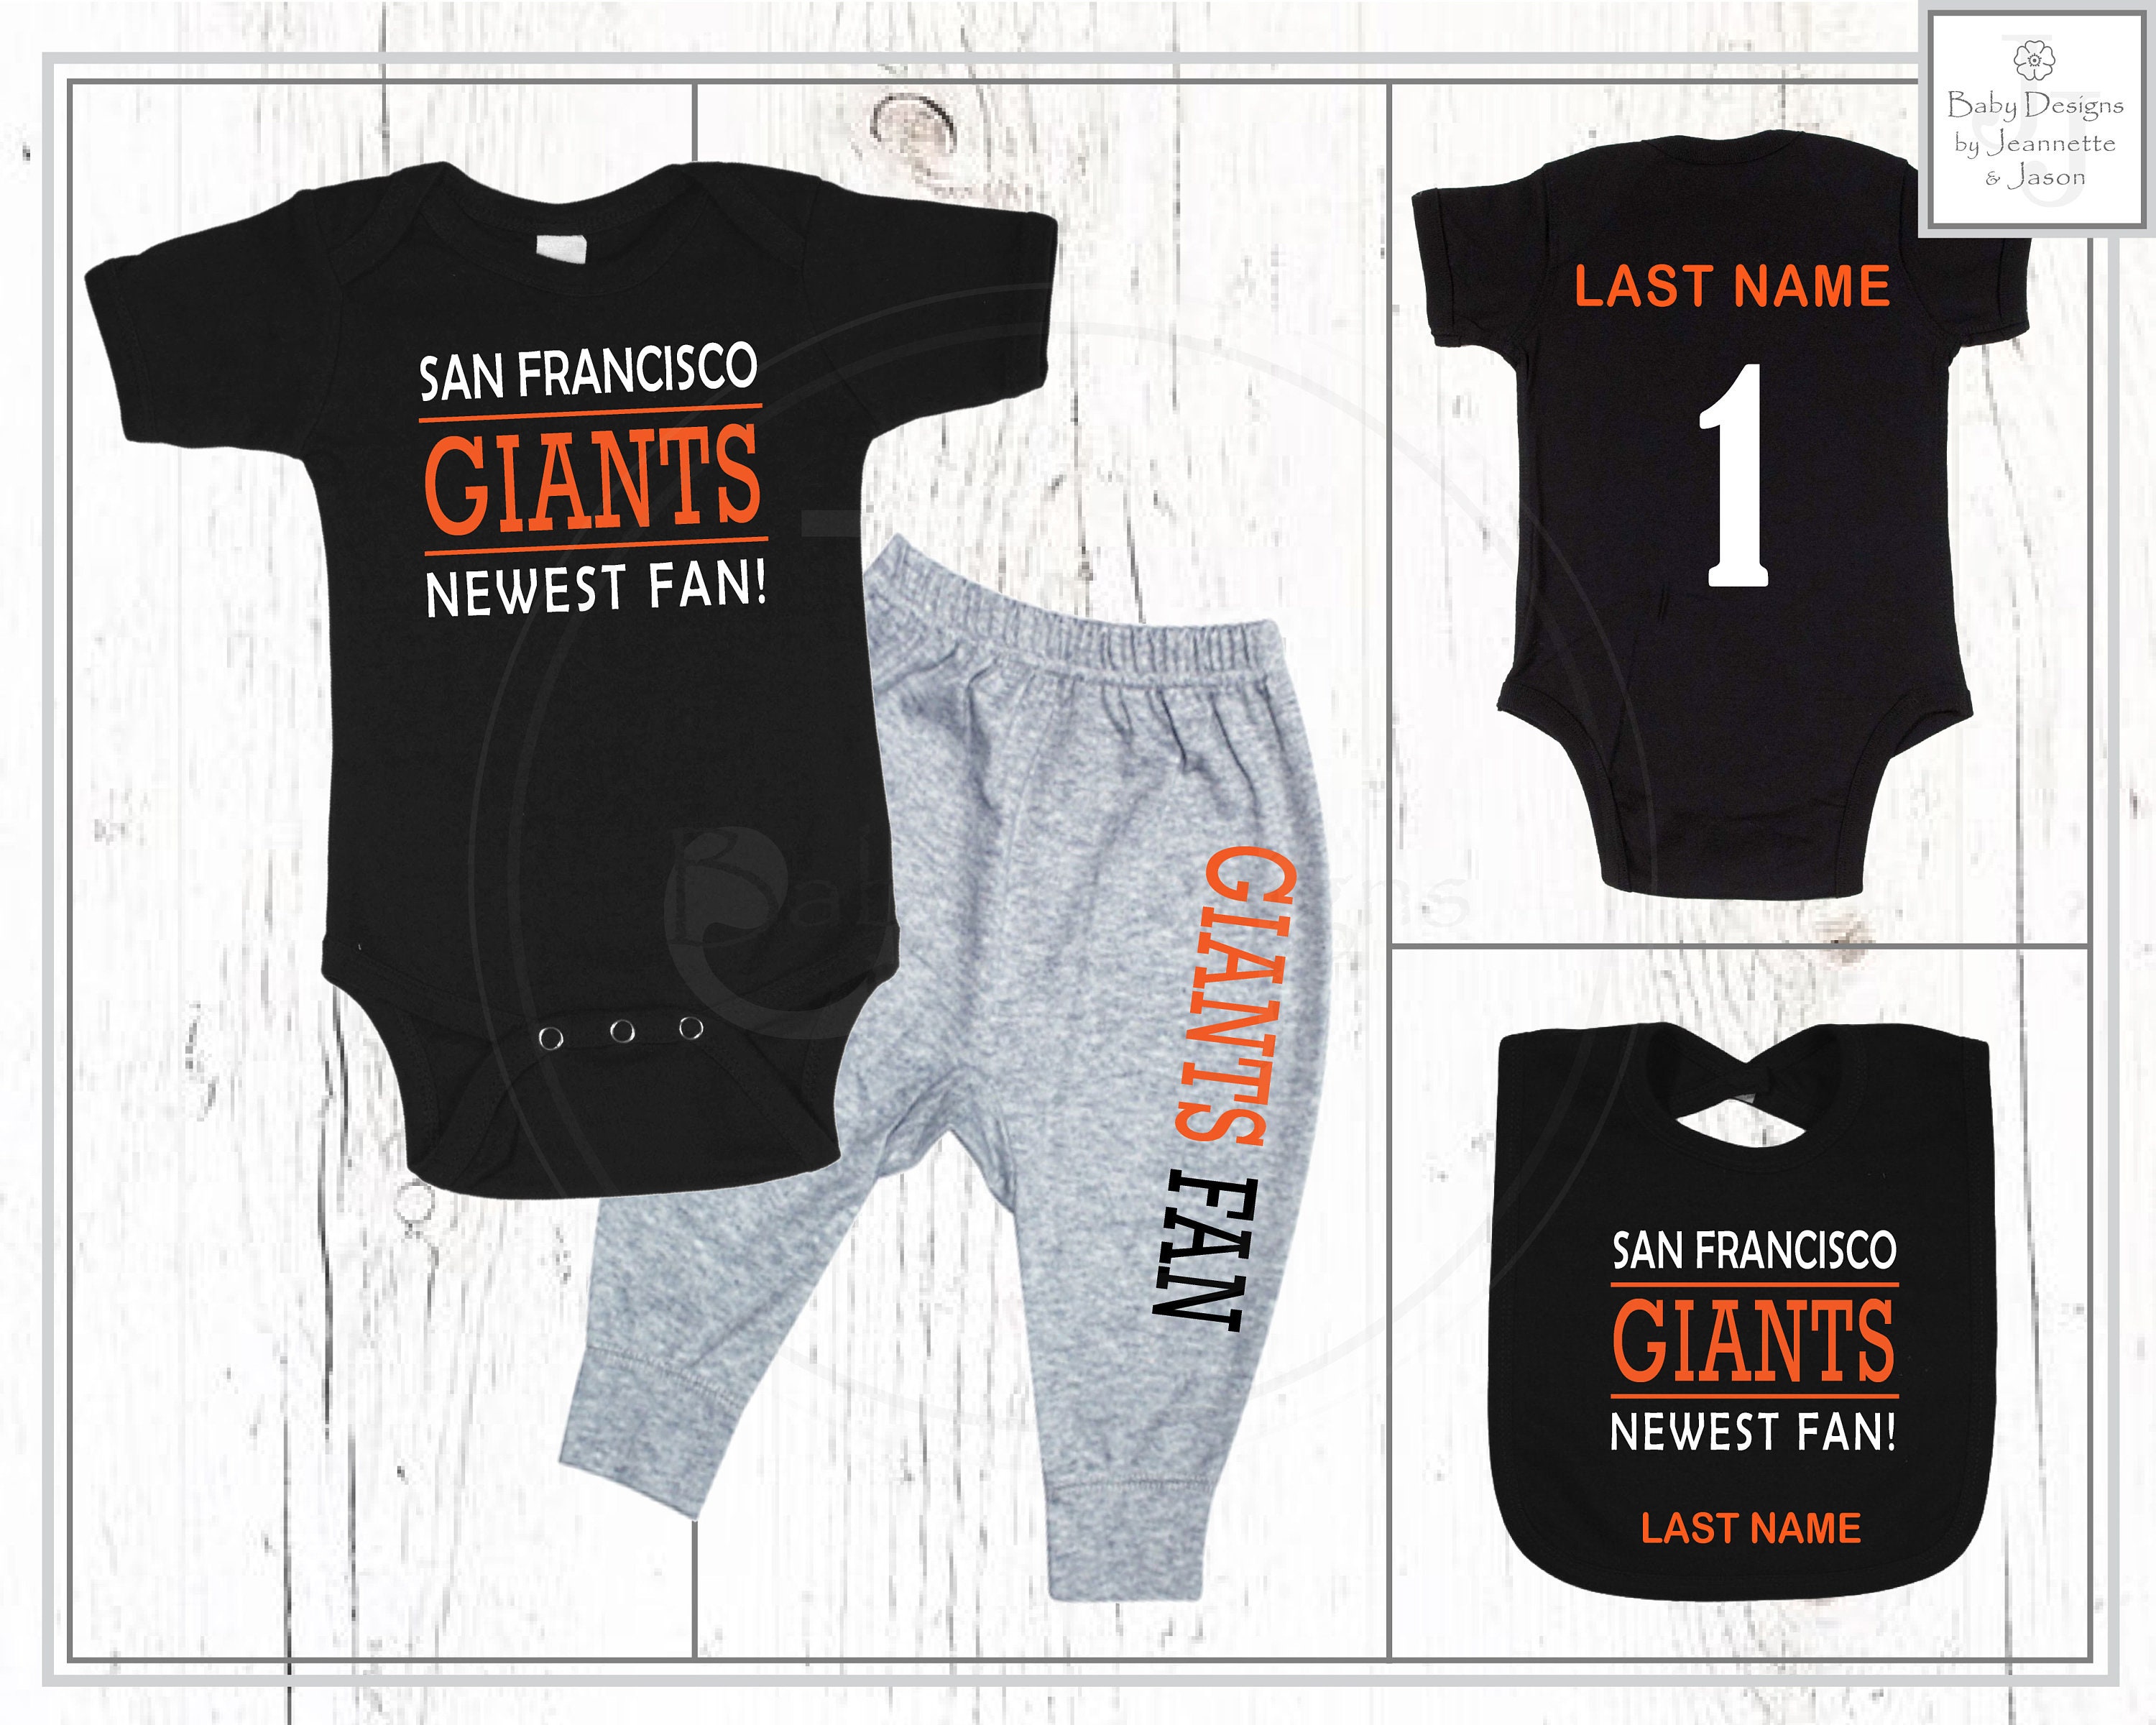 San Francisco Giants - Mother's and Father's Day - 2 Jersey Set